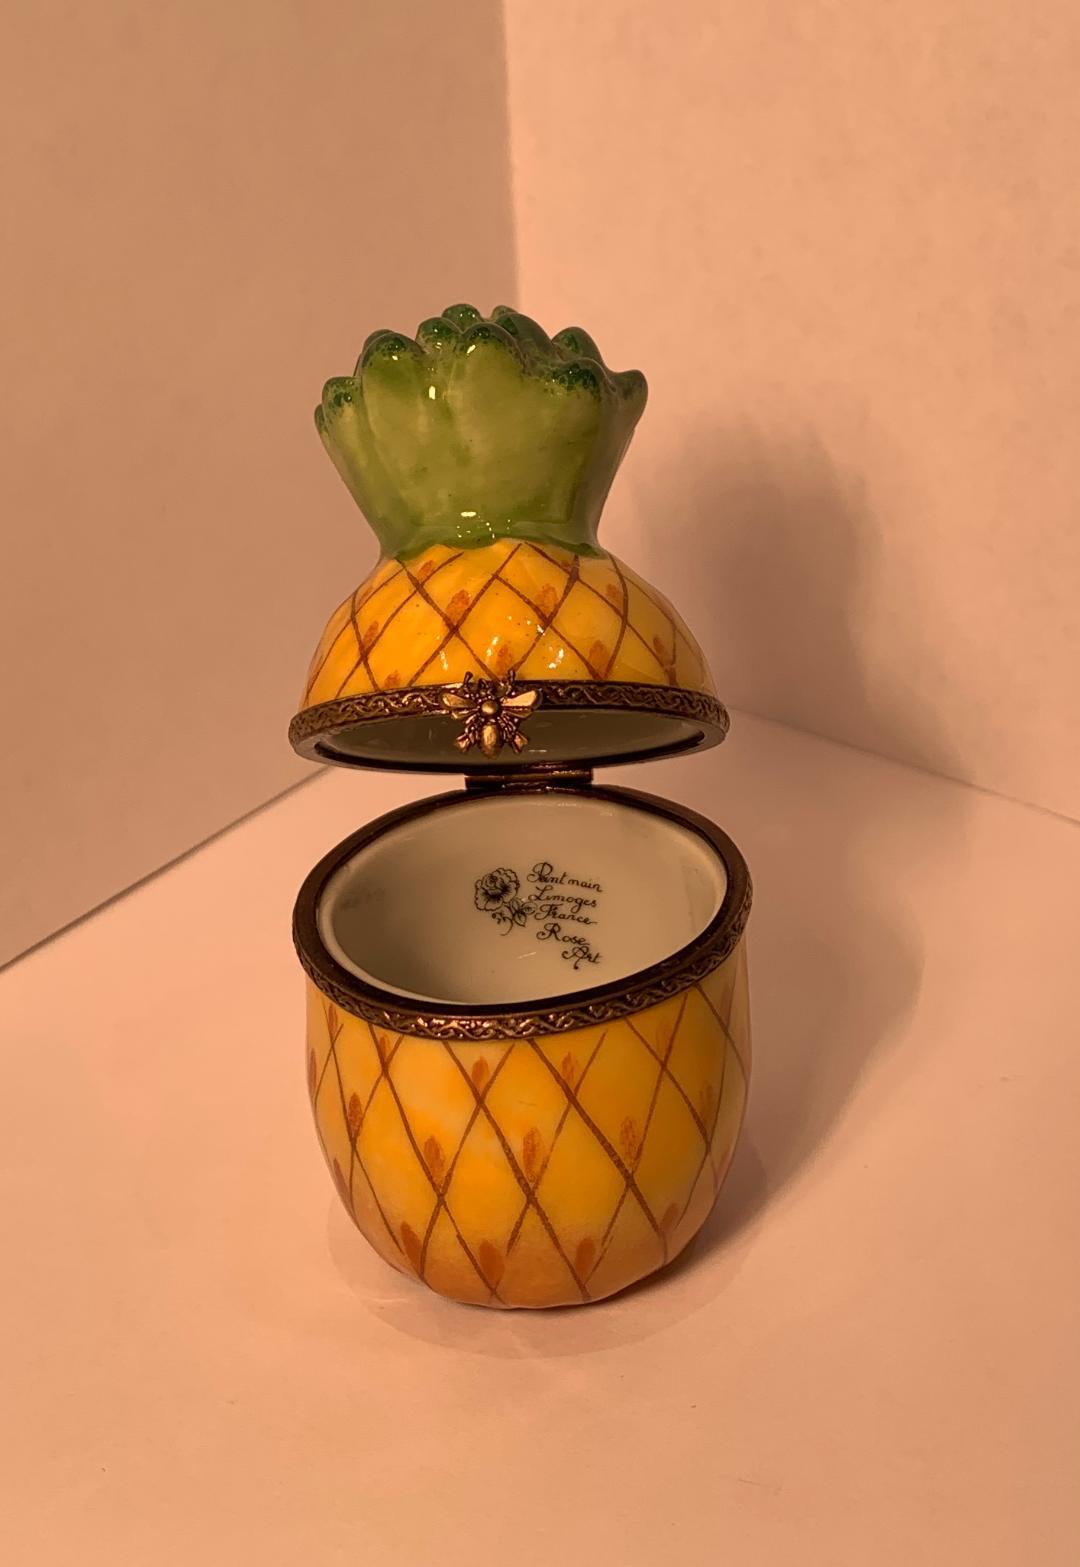 Collectible, handmade and hand painted Limoges porcelain trinket box depicts a miniature pineapple. The pineapple is the ultimate symbol of Southern hospitality and once represented unreachable wealth. The pineapple now represents warm welcomes,